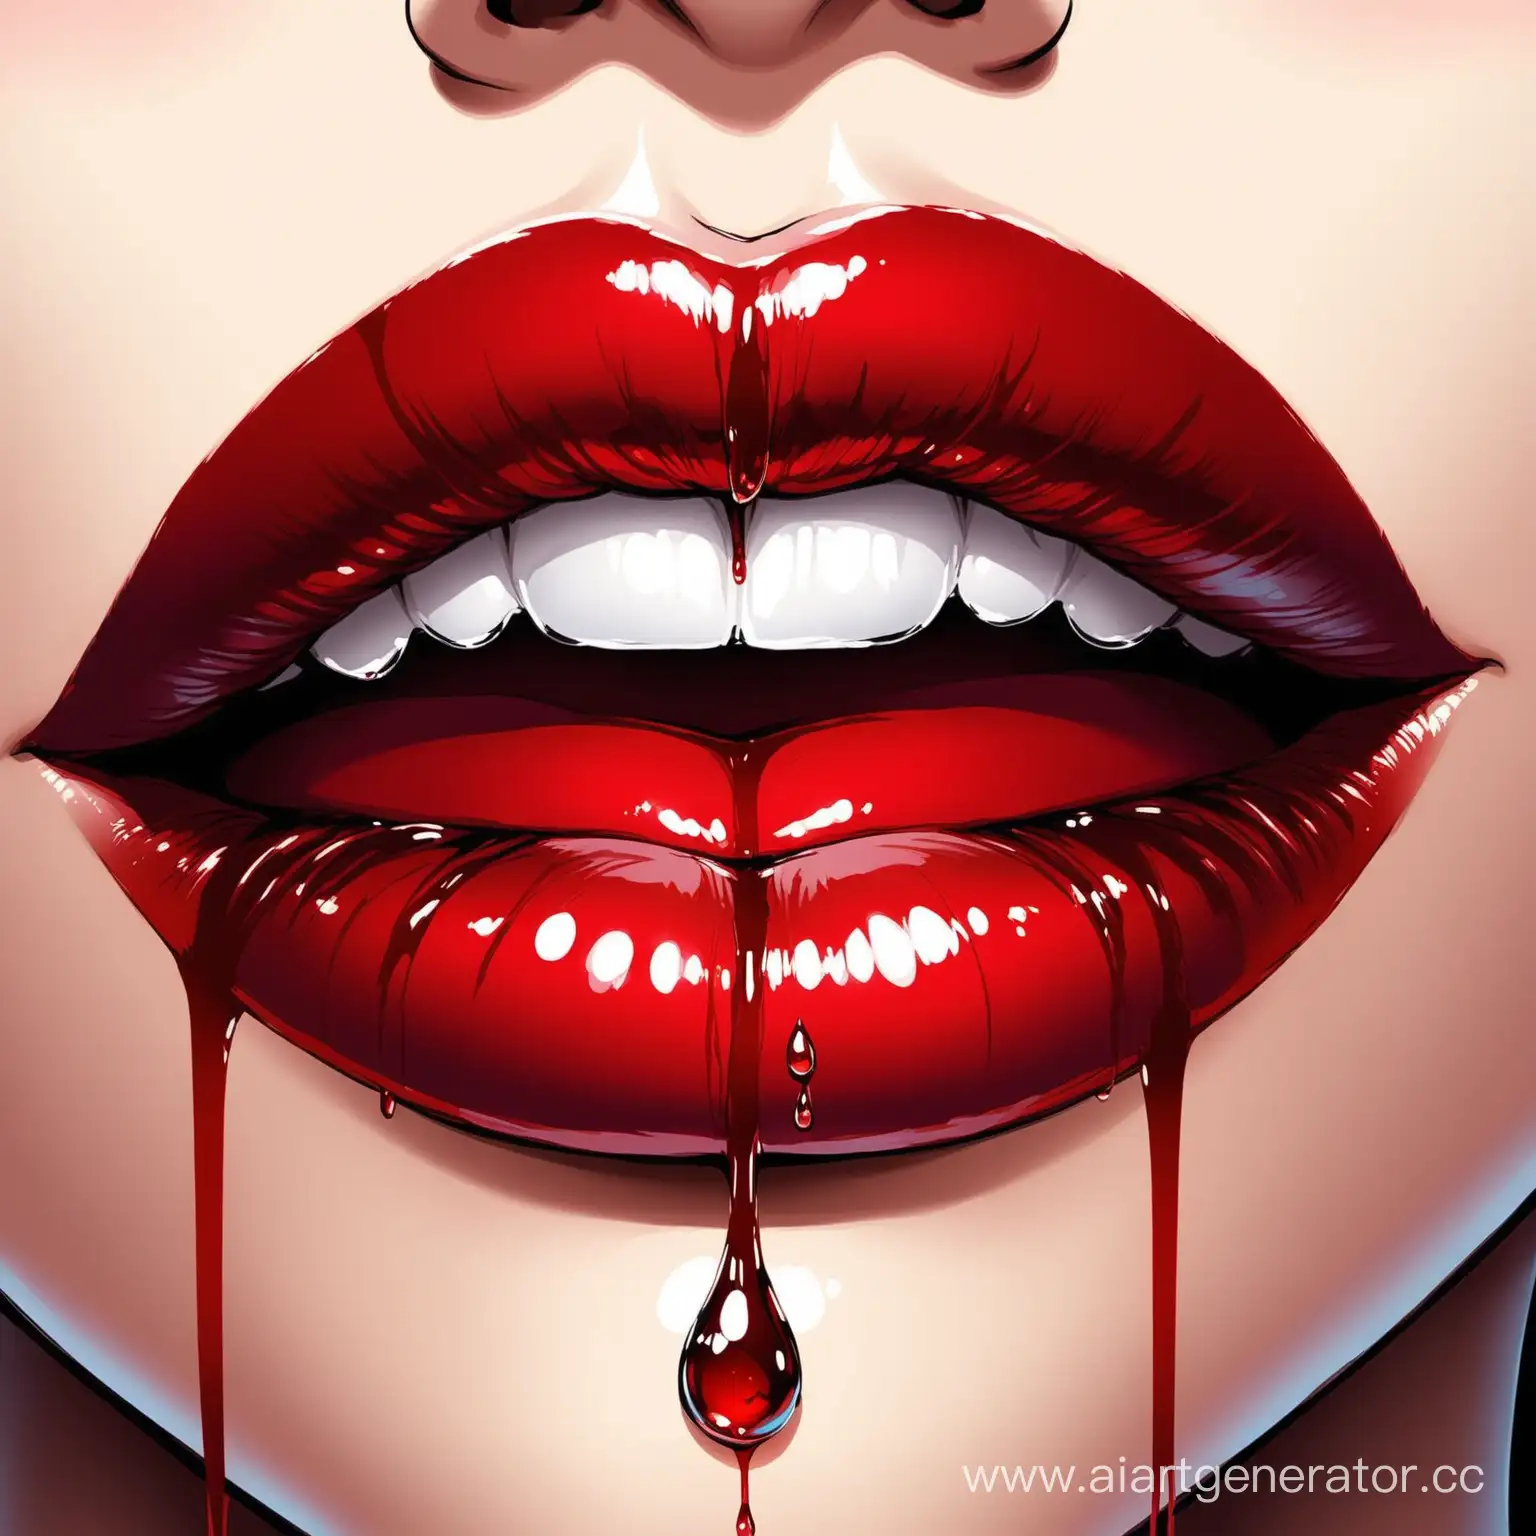 Sensual-Red-Lips-with-a-Hint-of-Danger-Seductive-Drop-of-Blood